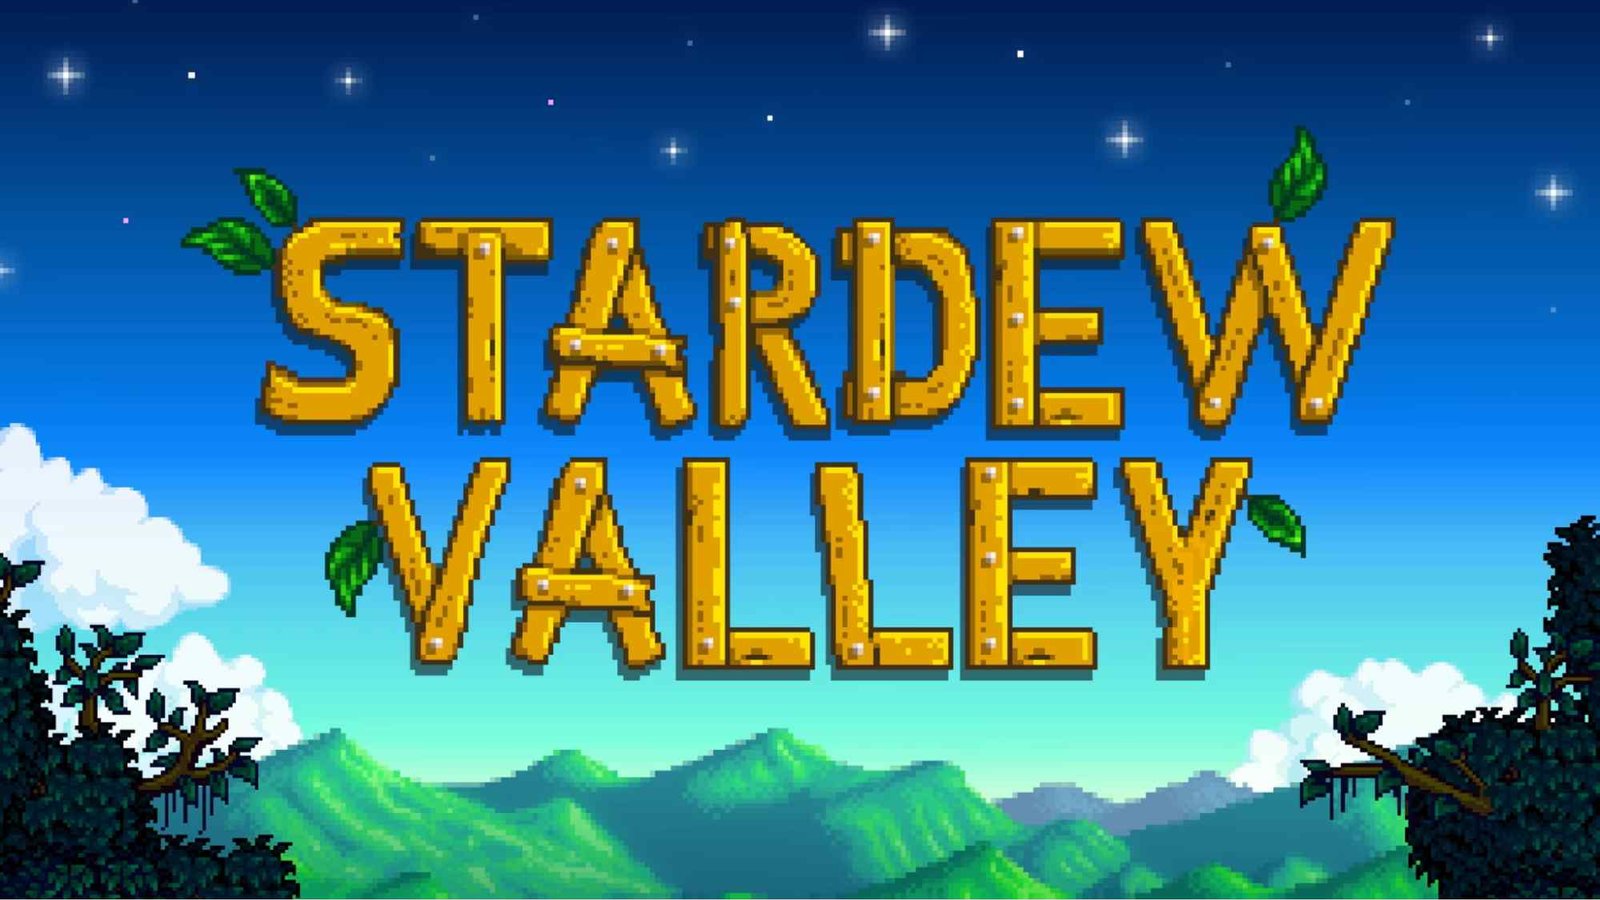 How To Animation Cancel In Stardew Valley? - RPG Overload